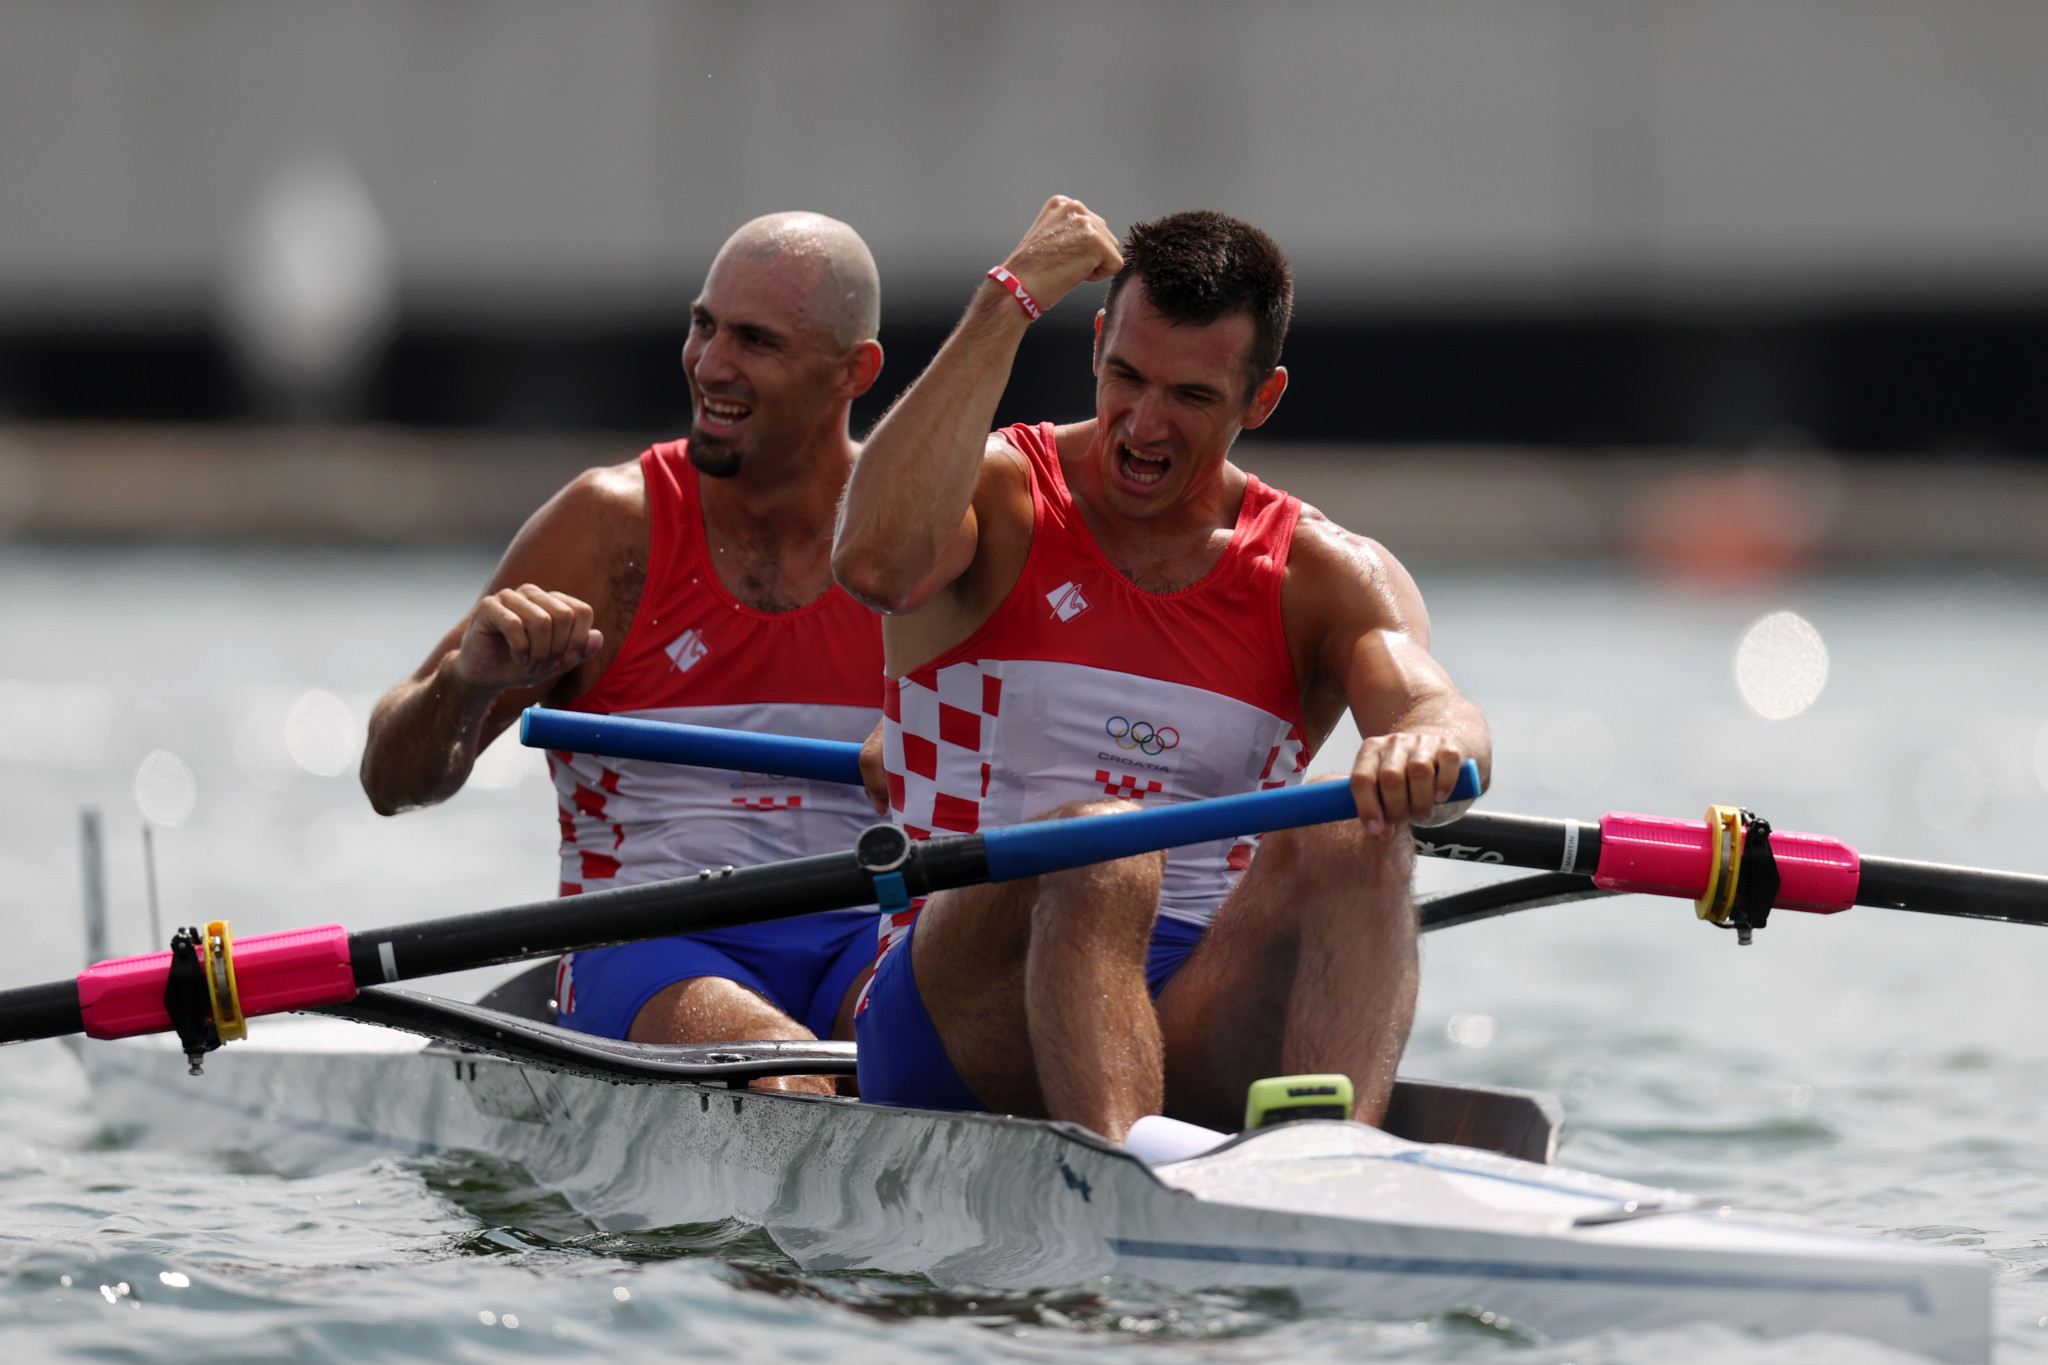 Zagreb set to host season-opening World Rowing Cup